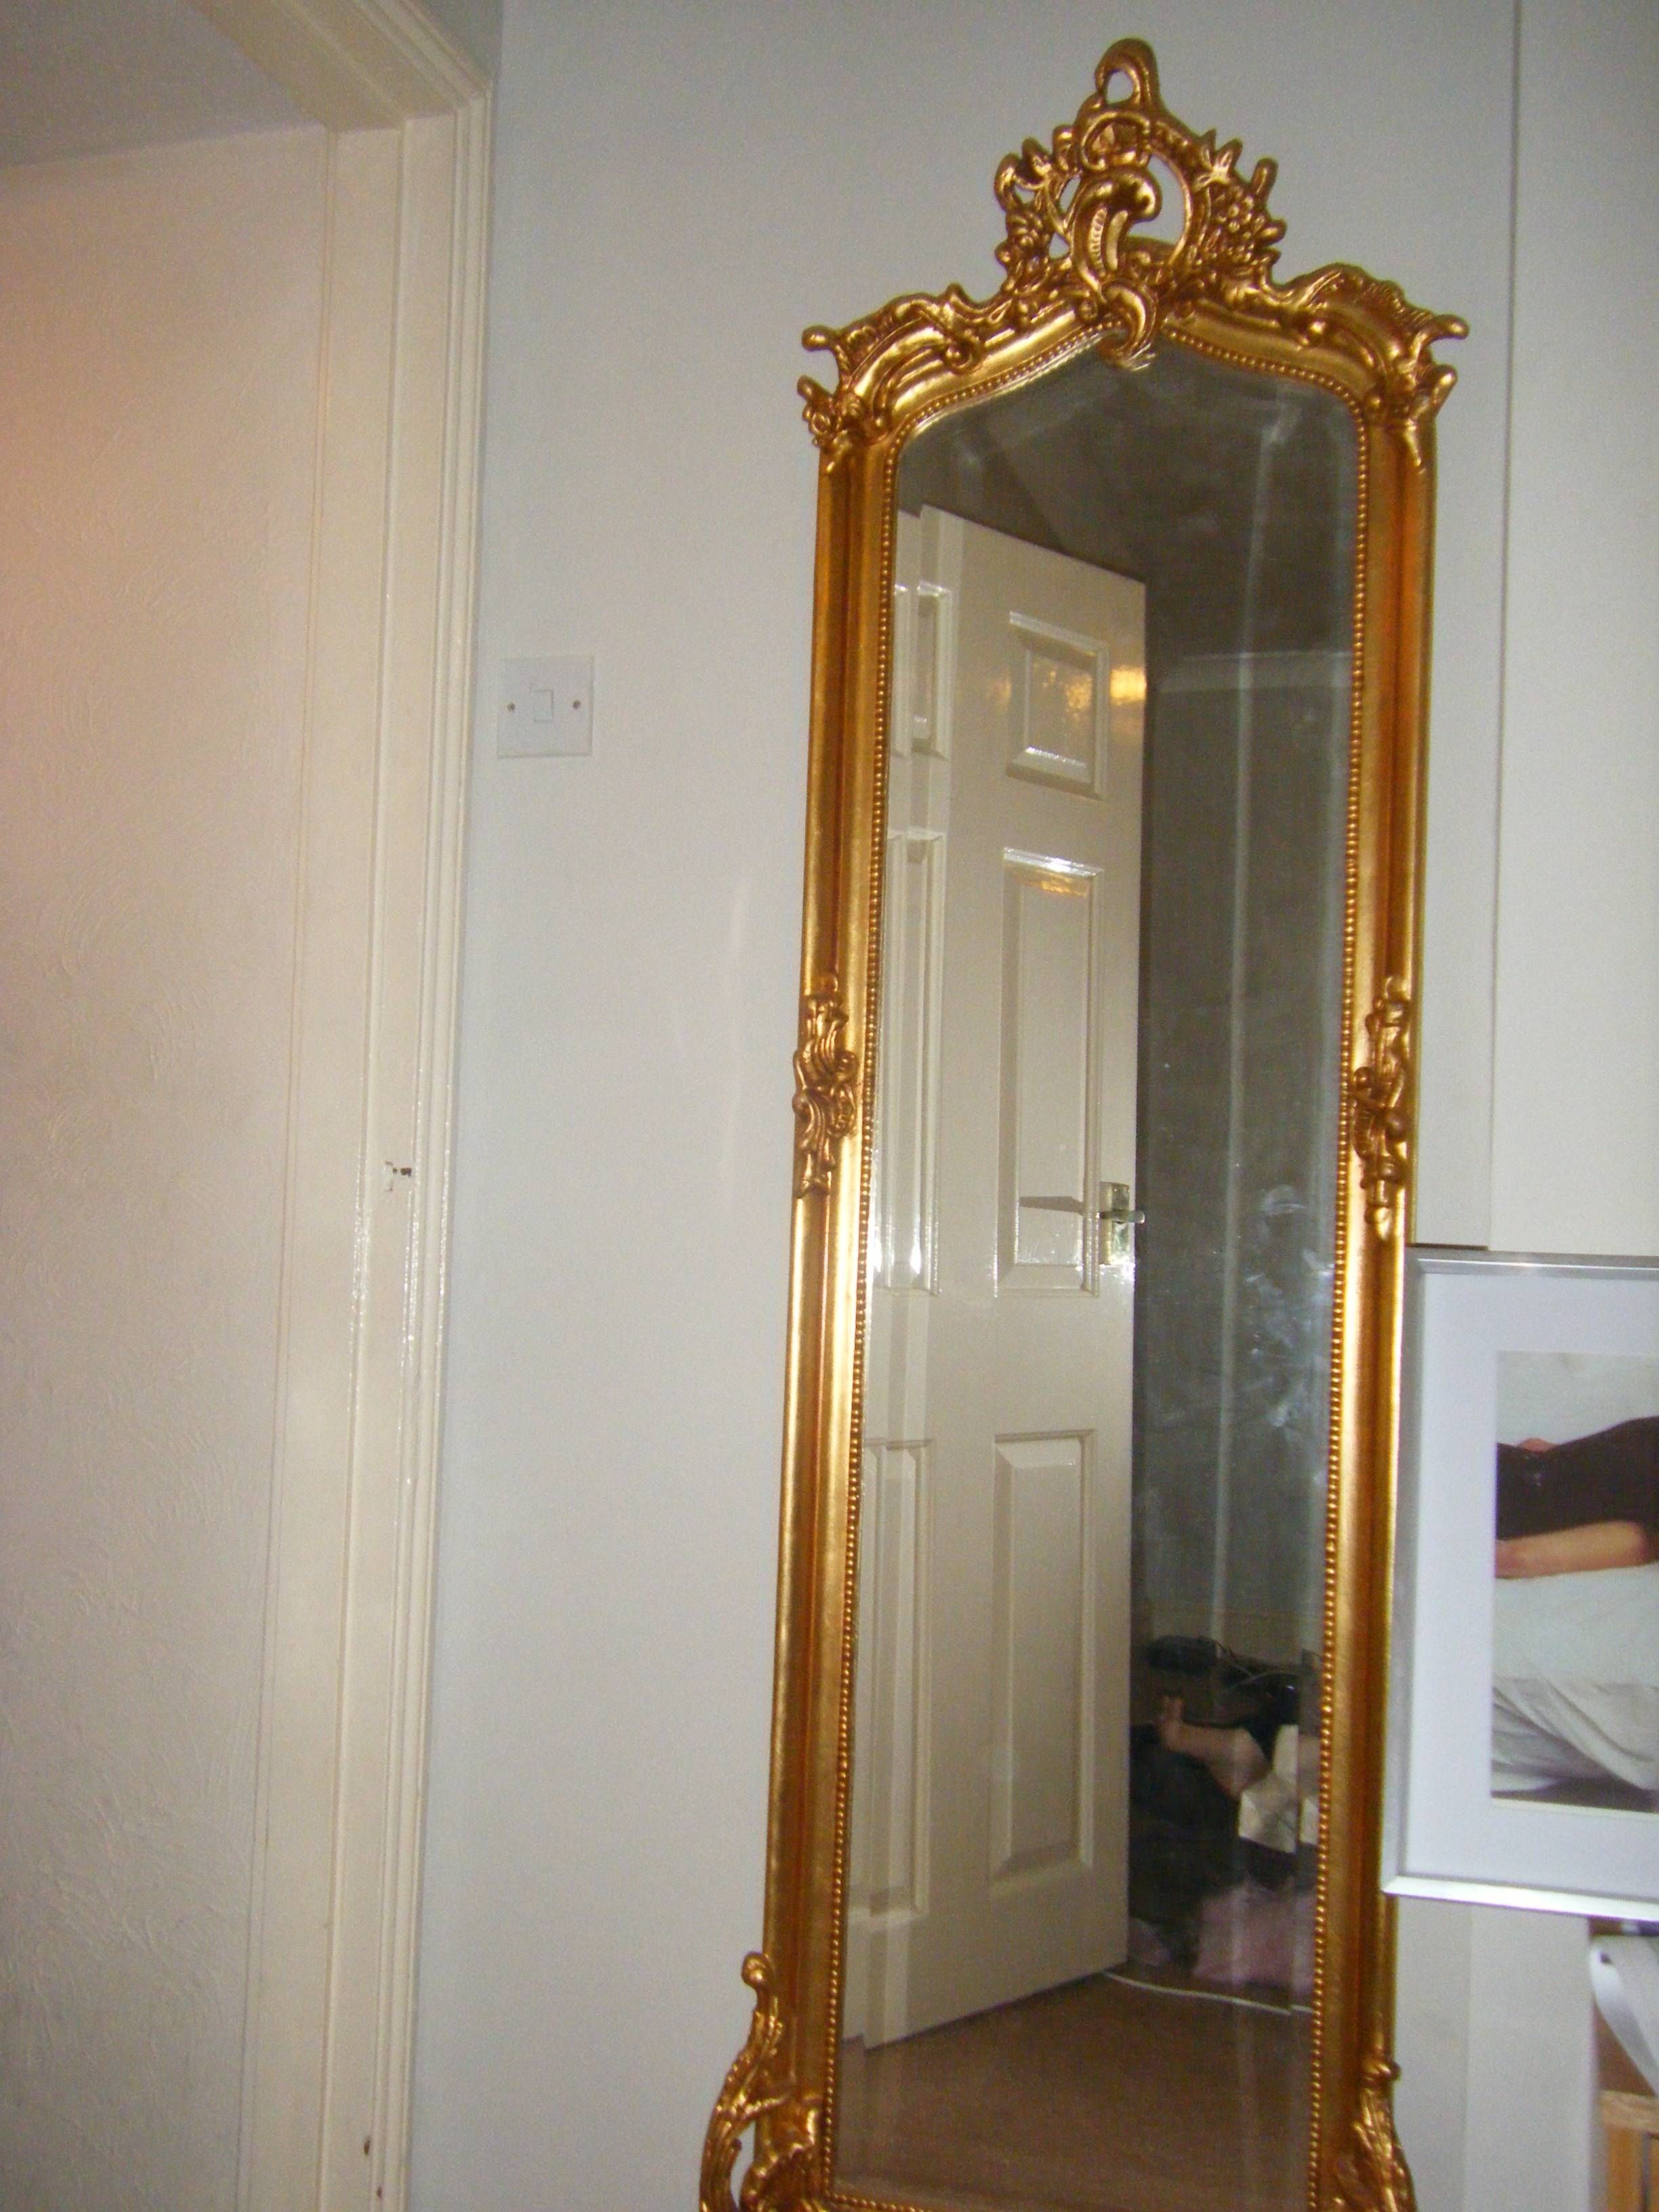 Homeware: Oval Full Length Standing Mirror | Large Floor Mirrors Throughout Full Length Antique Mirrors (View 3 of 15)